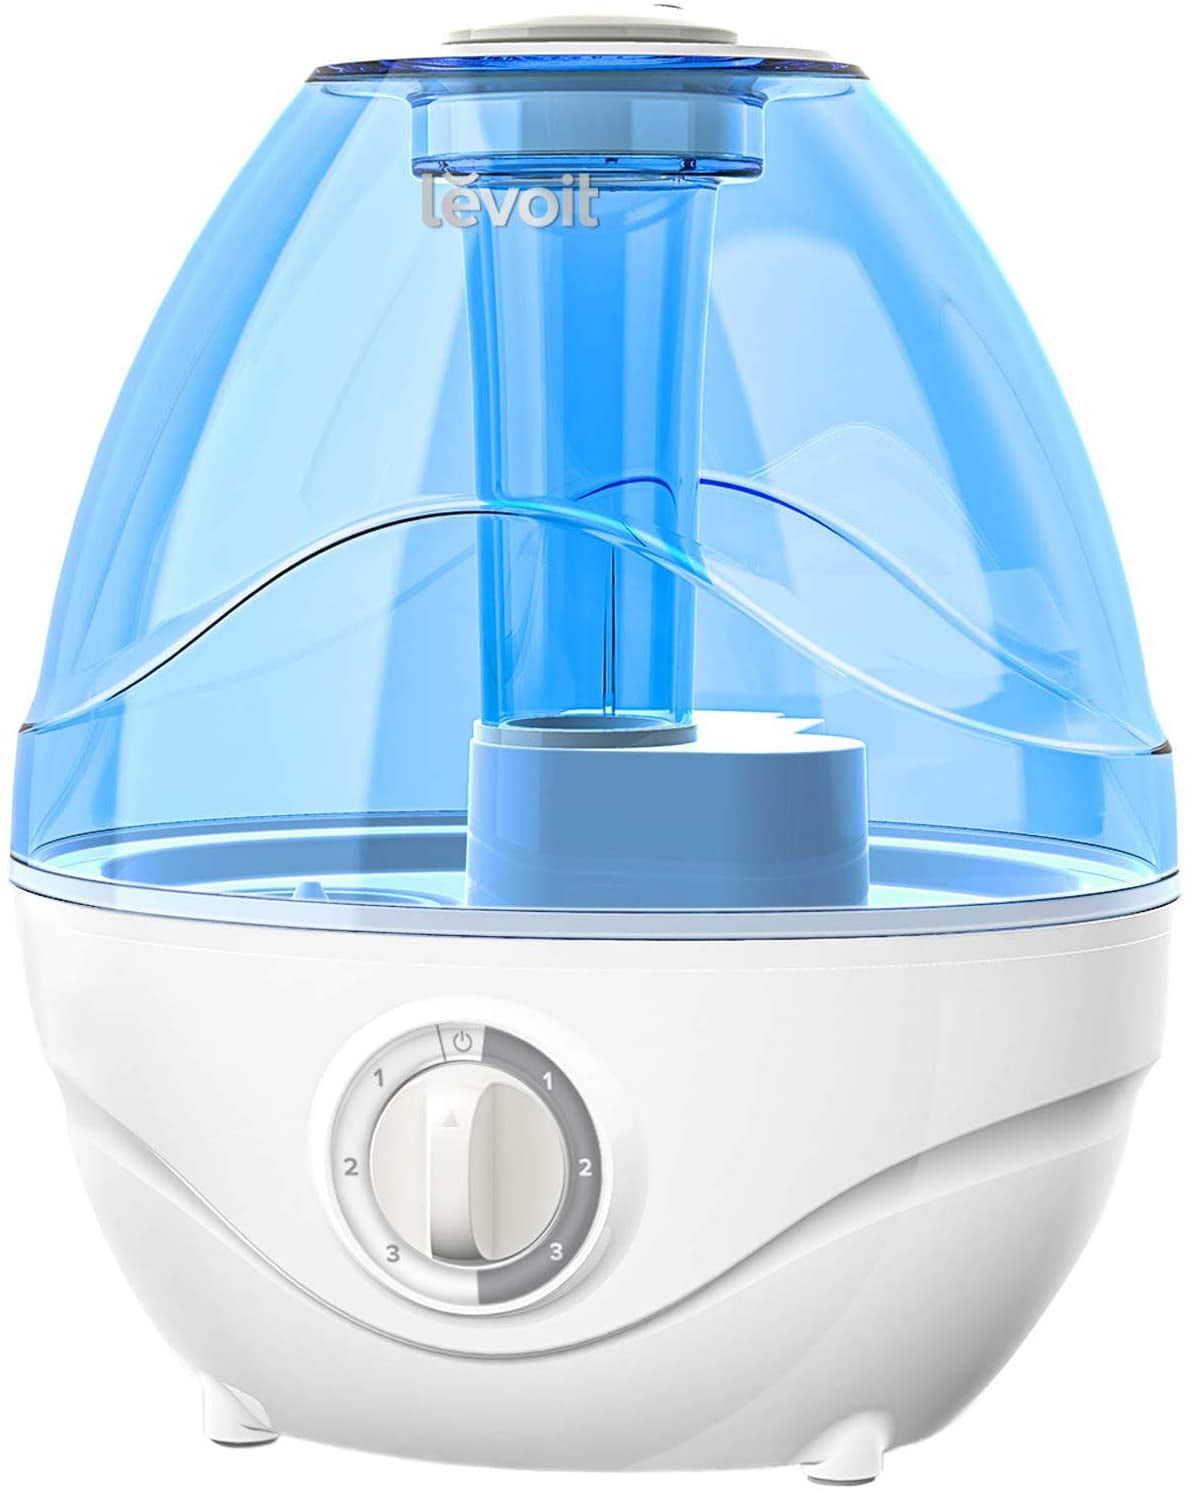 LEVOIT Humidifiers,BPA Free,Quiet Cool Mist Humidifier for